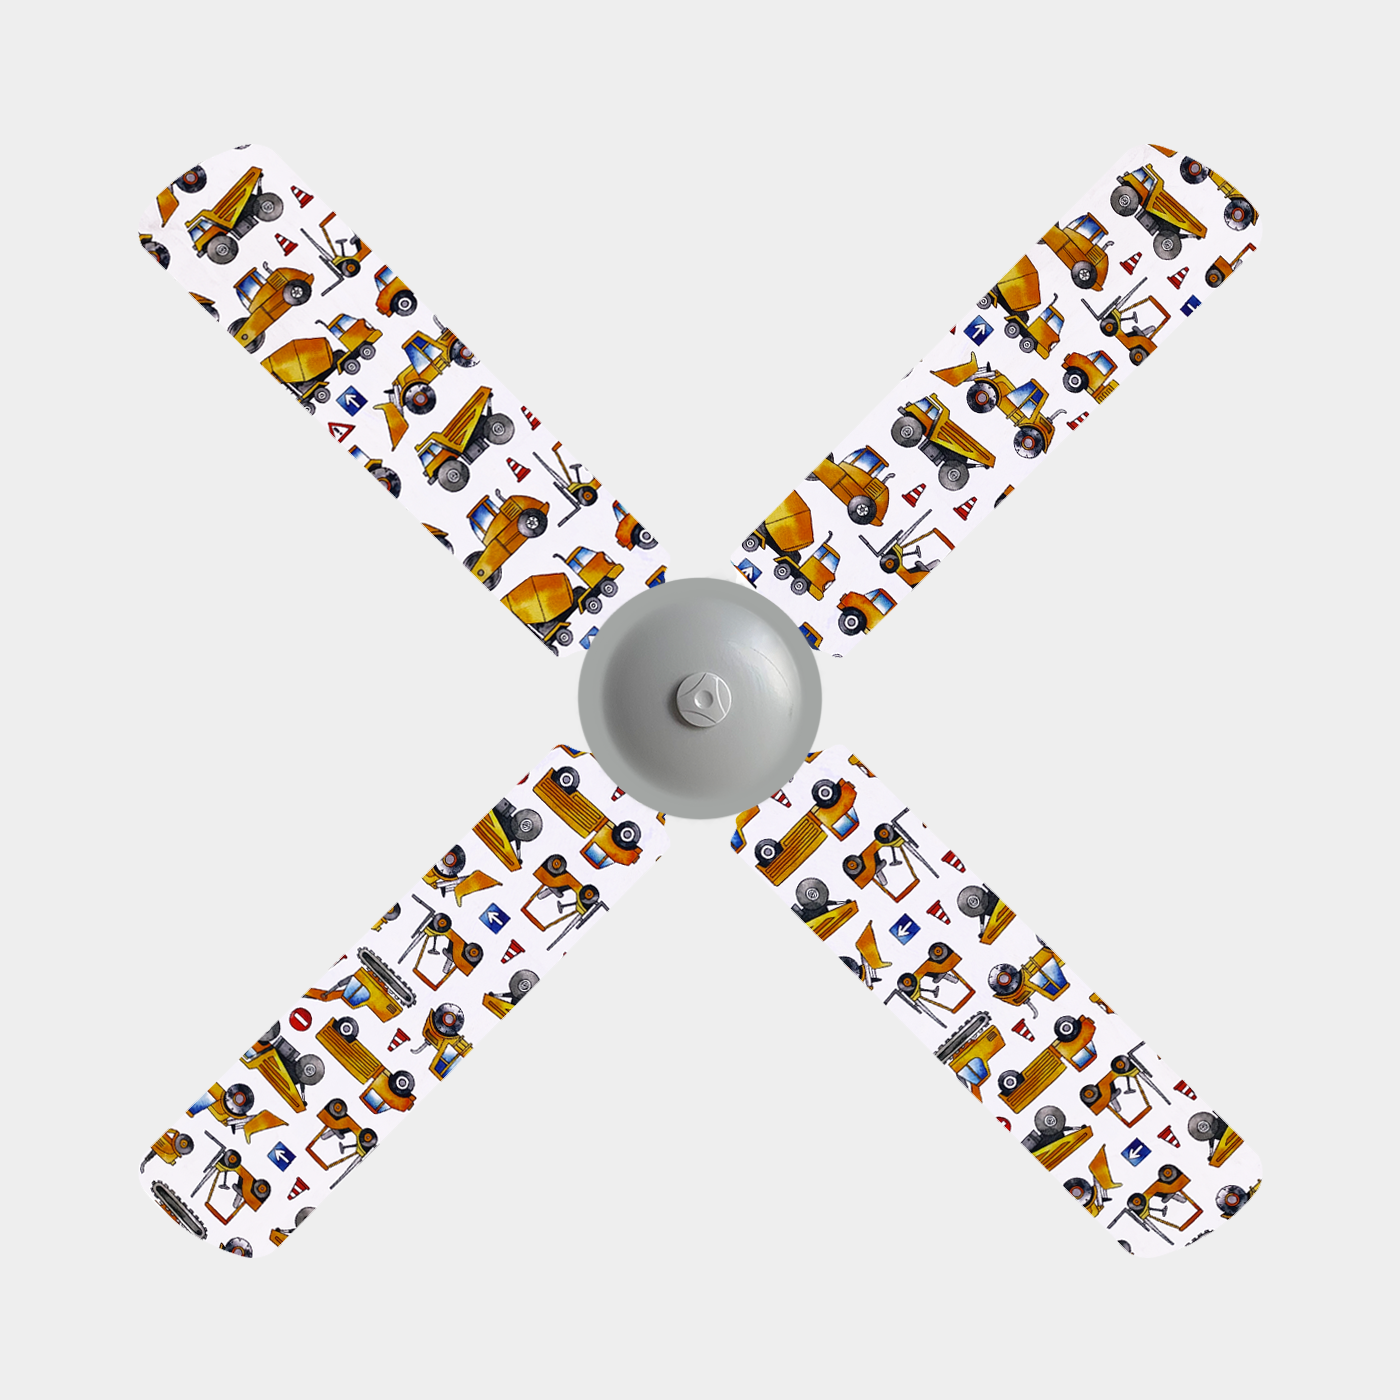 Fan Blade covers with orange and yellow construction vehicles on white background